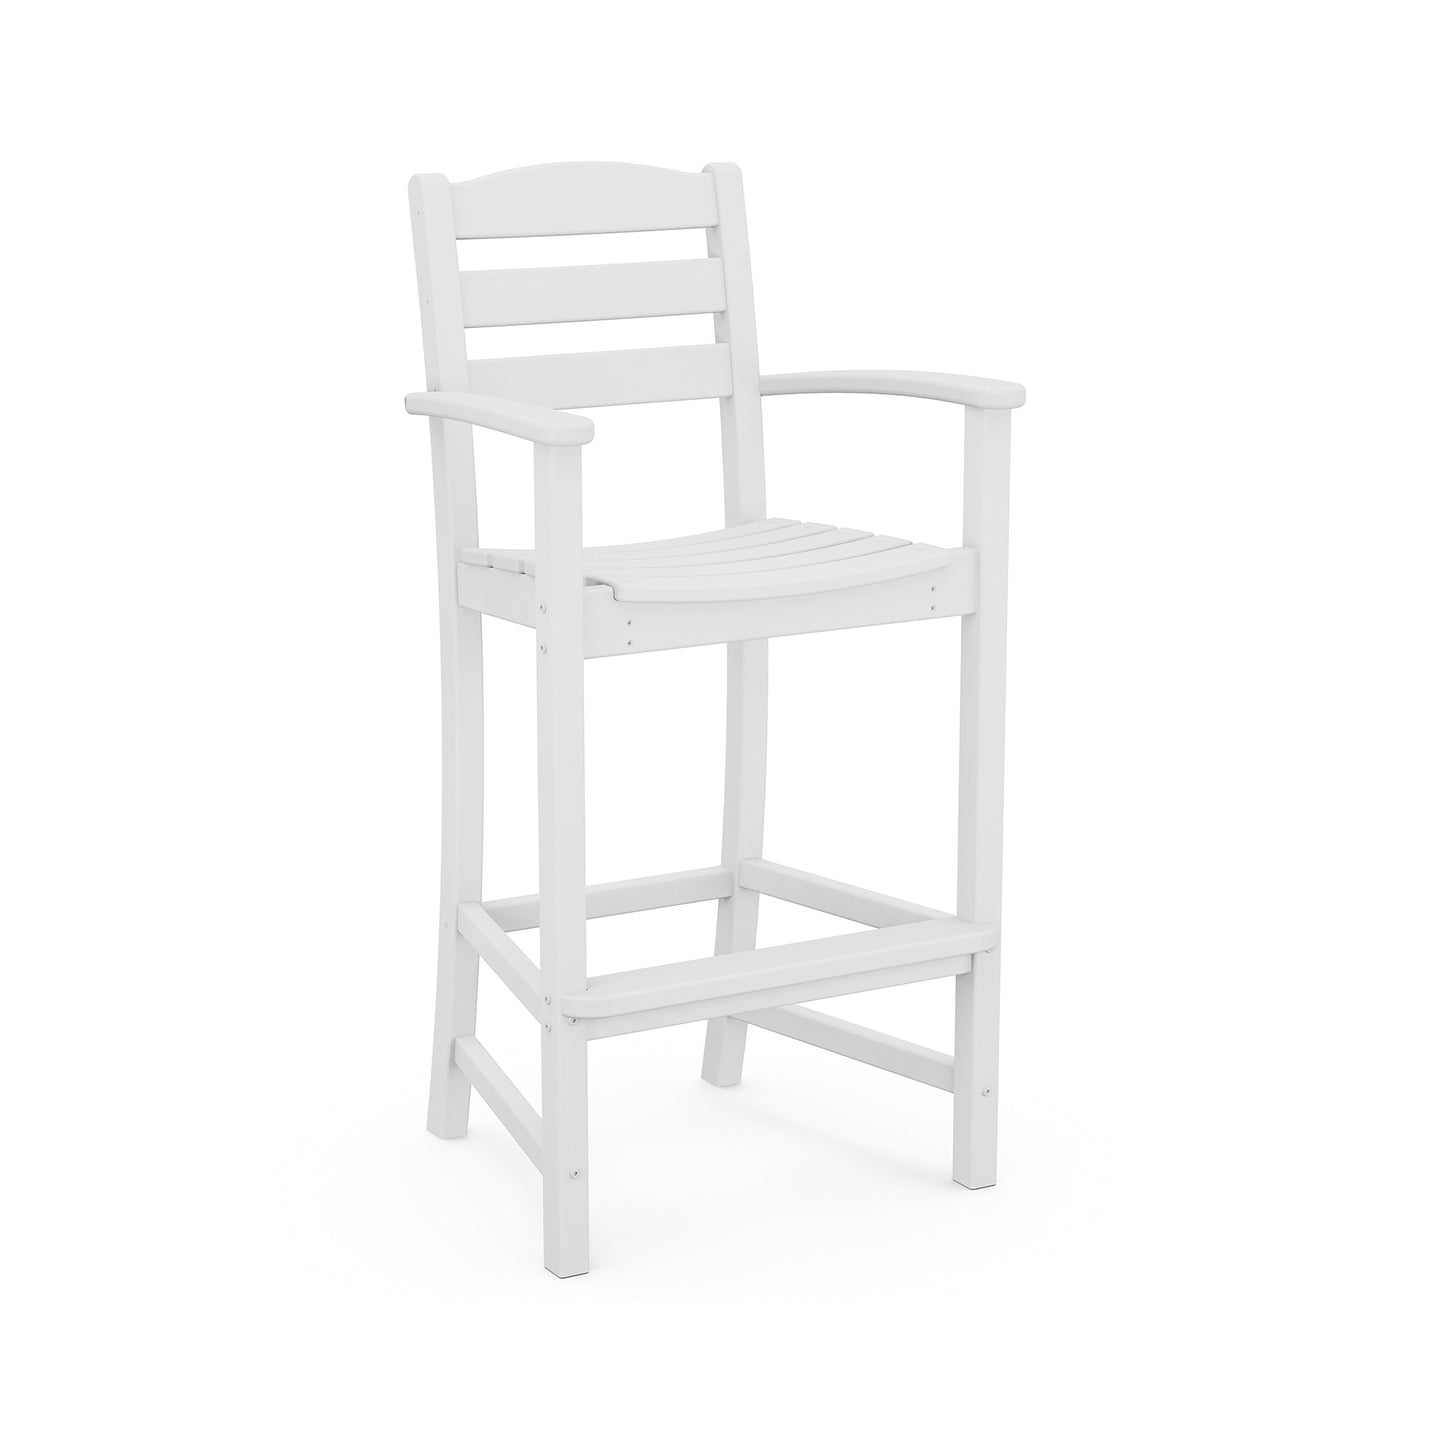 A white POLYWOOD La Casa Cafe Outdoor Bar Arm Chair with a high back and footrest, isolated on a white background.